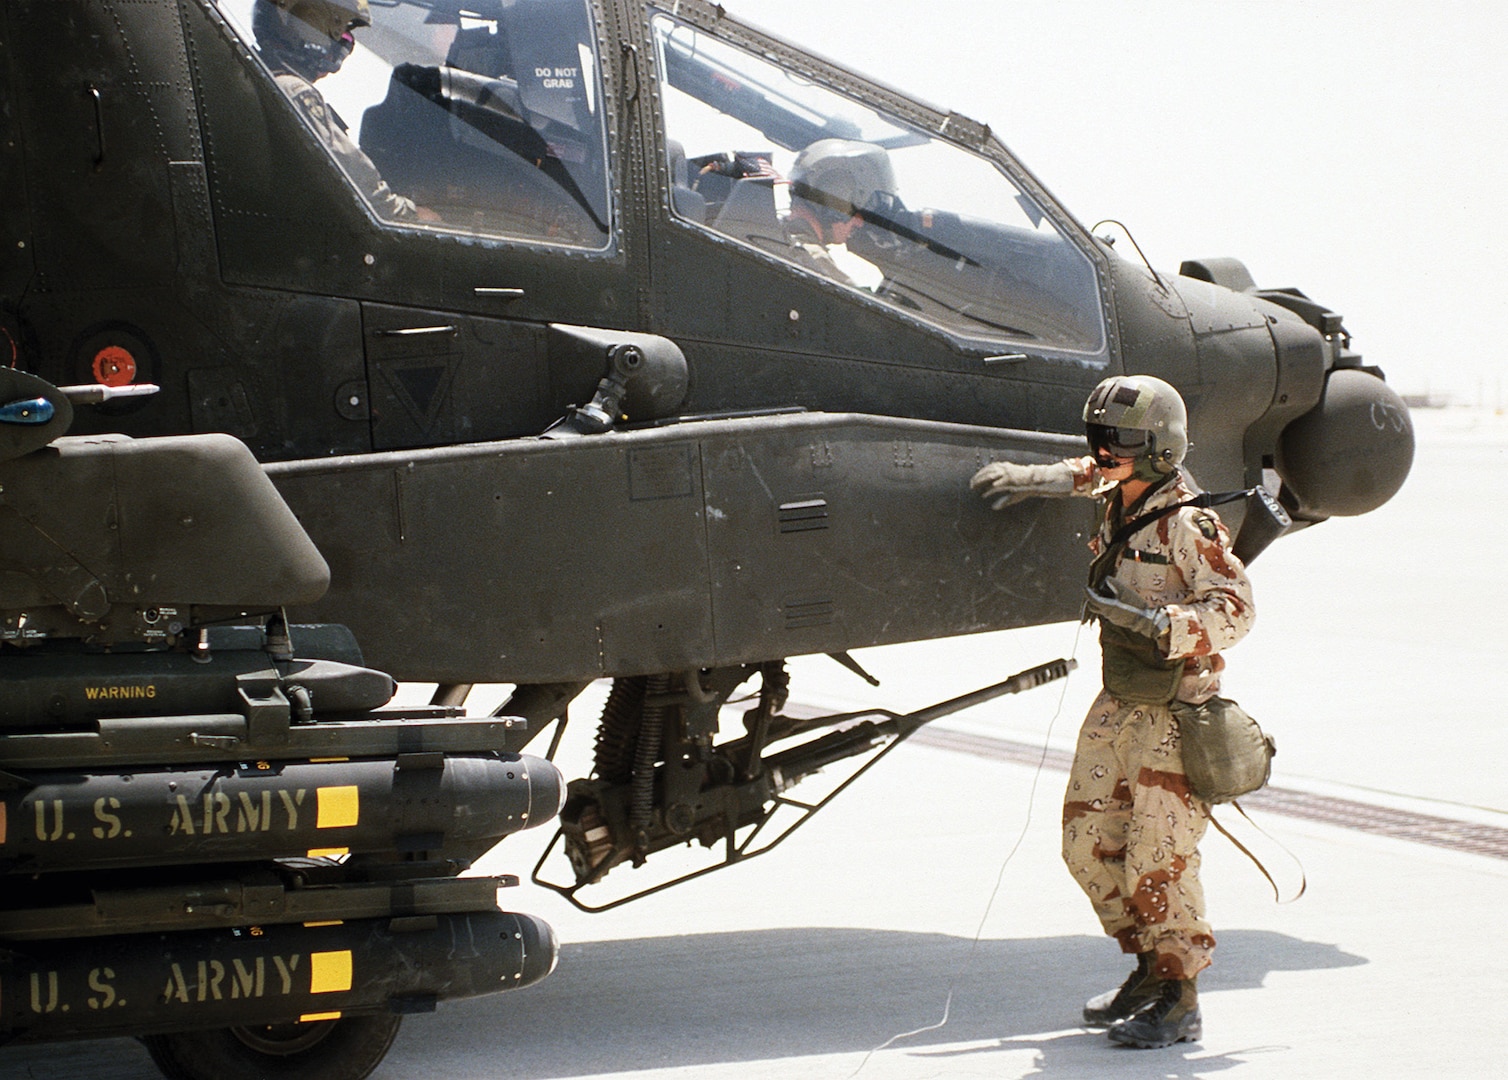 Crewman from 101st Airborne Division (Air Assault) stands beside AH-64A Apache helicopter